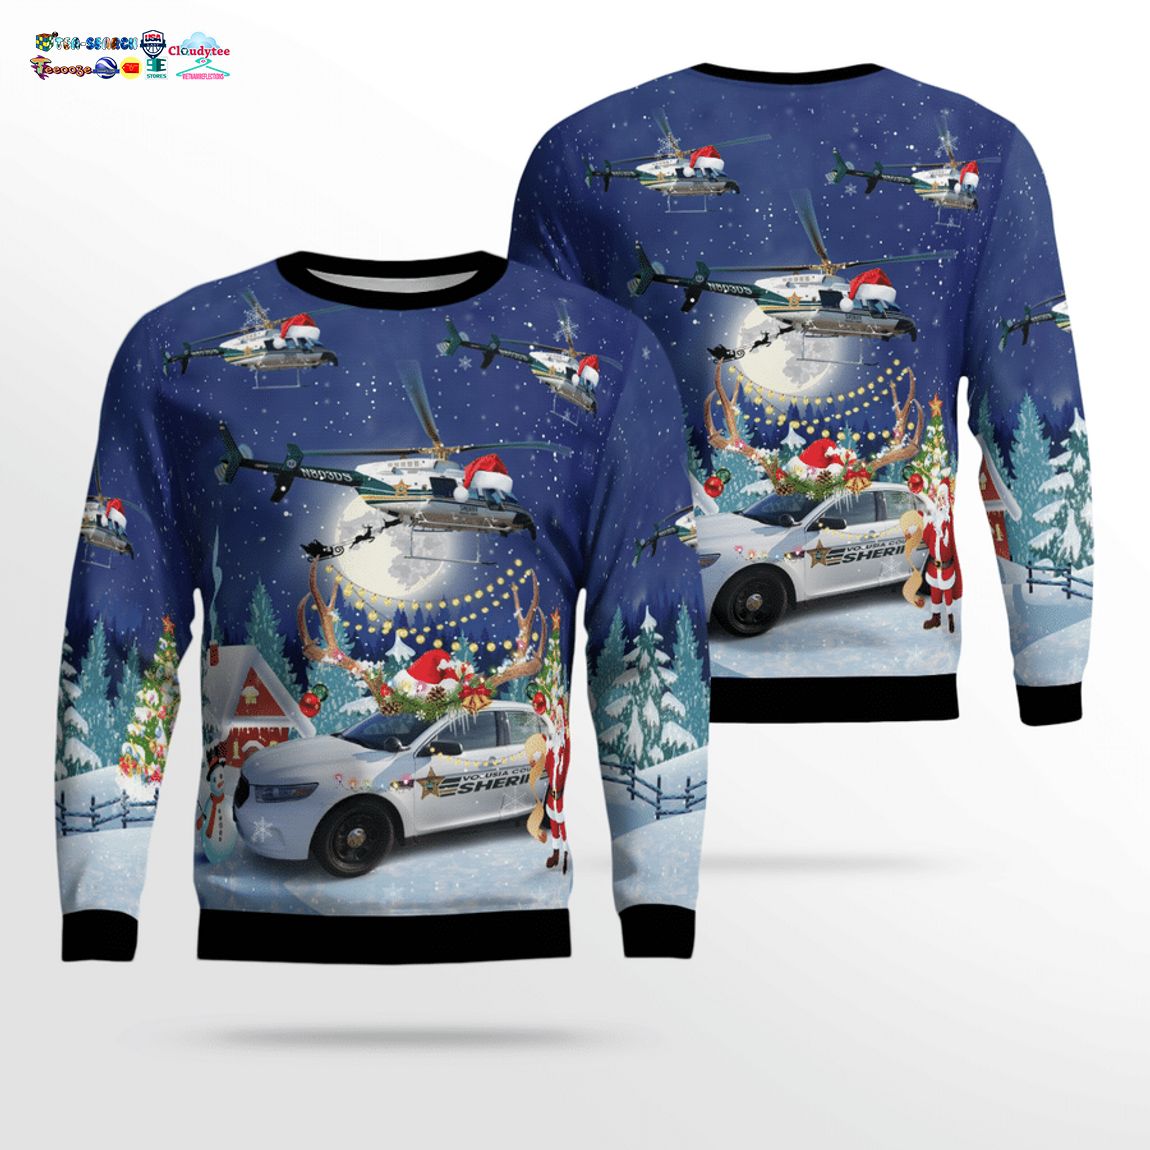 volusia-county-sheriff-bell-407-and-ford-police-interceptor-3d-christmas-sweater-1-HQ6qM.jpg